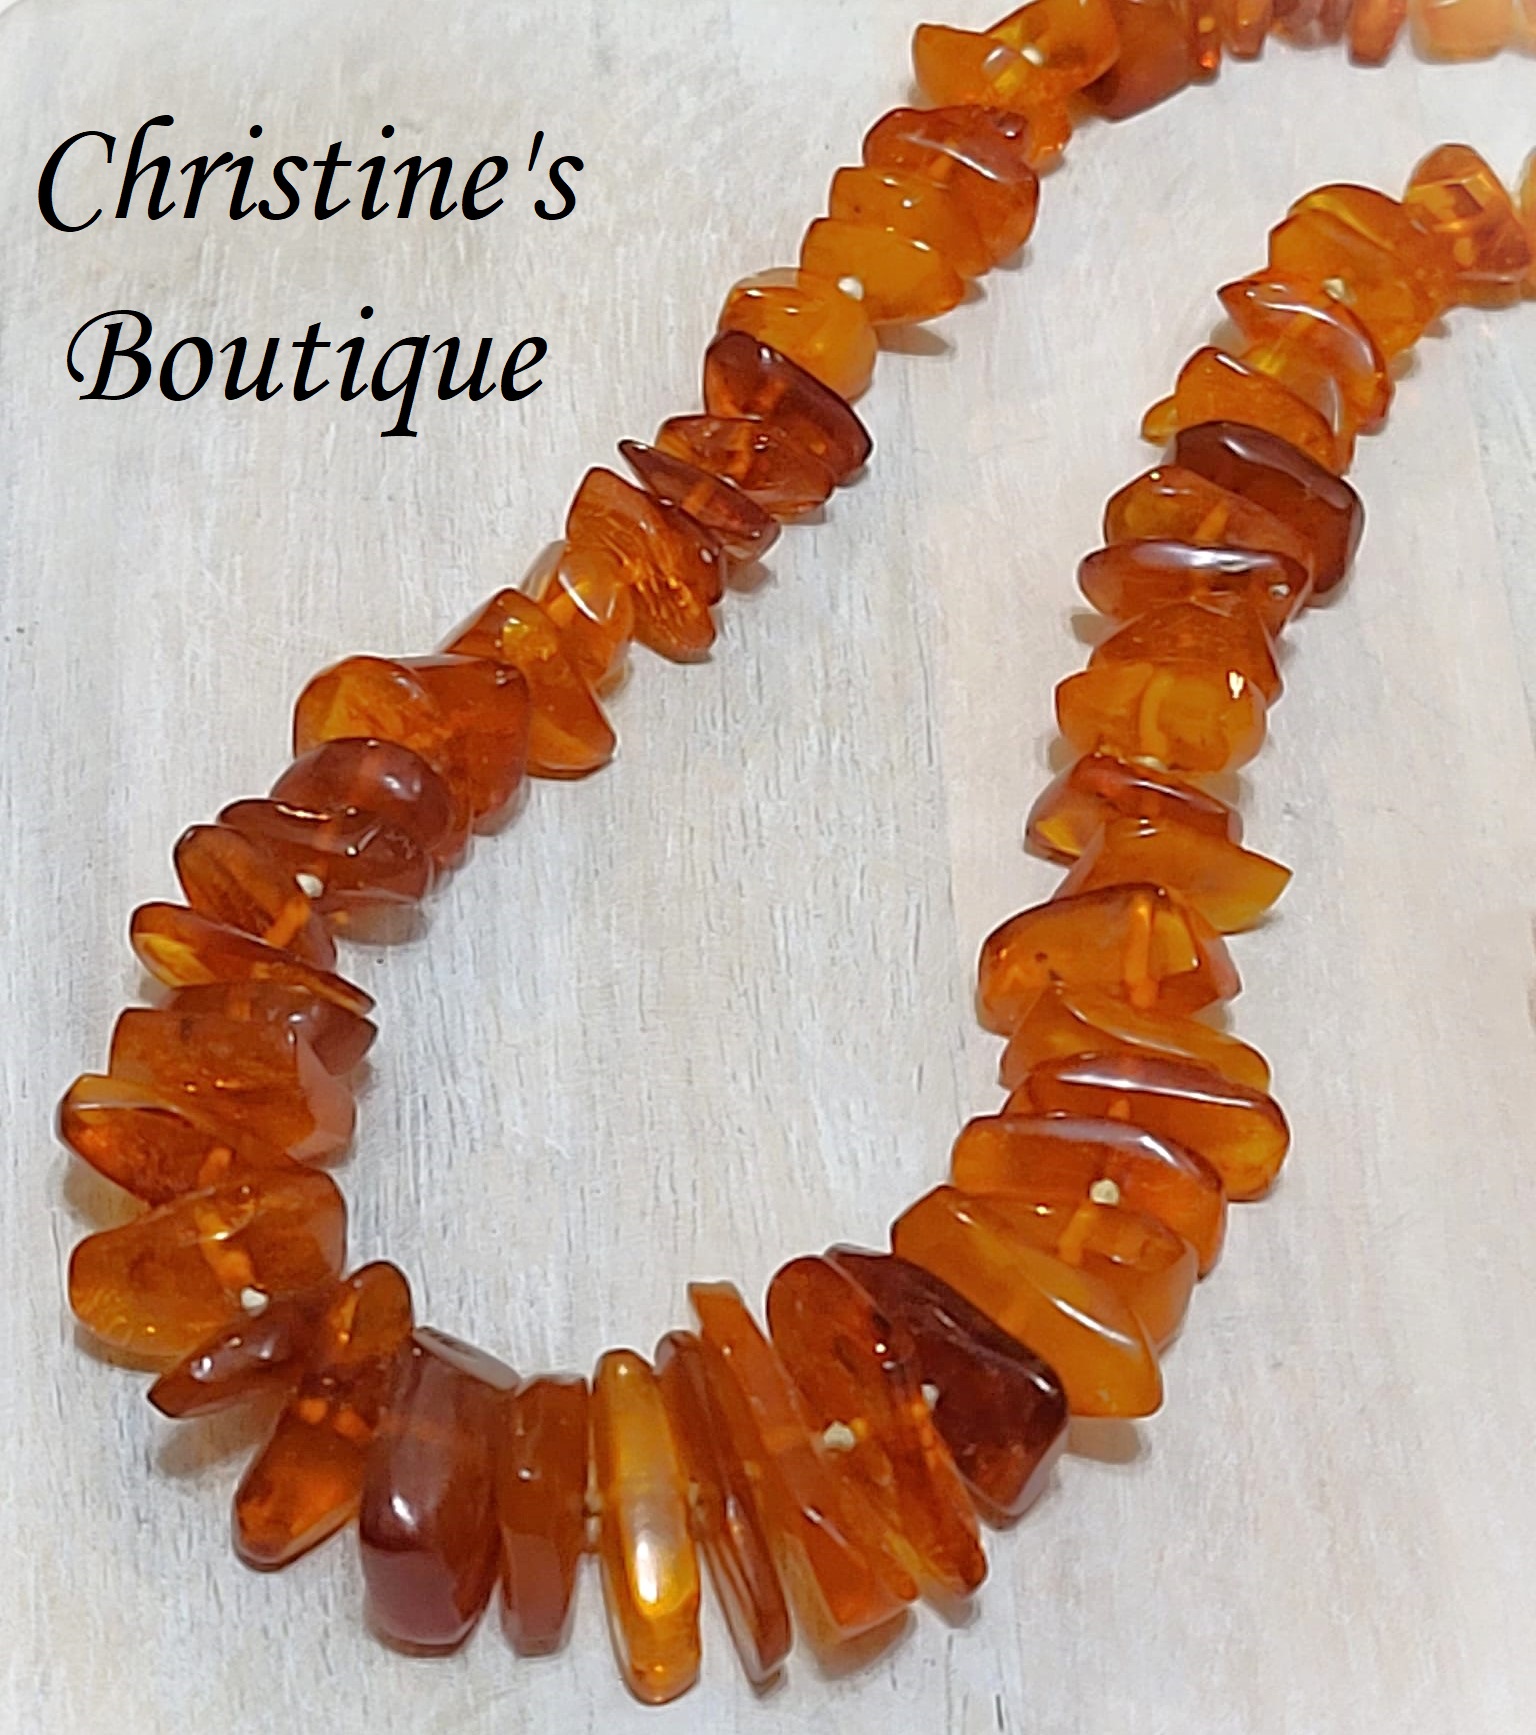 Estate necklace, geniune amber nugget necklace, varigated sized large to small, knotted amber, 33 inches